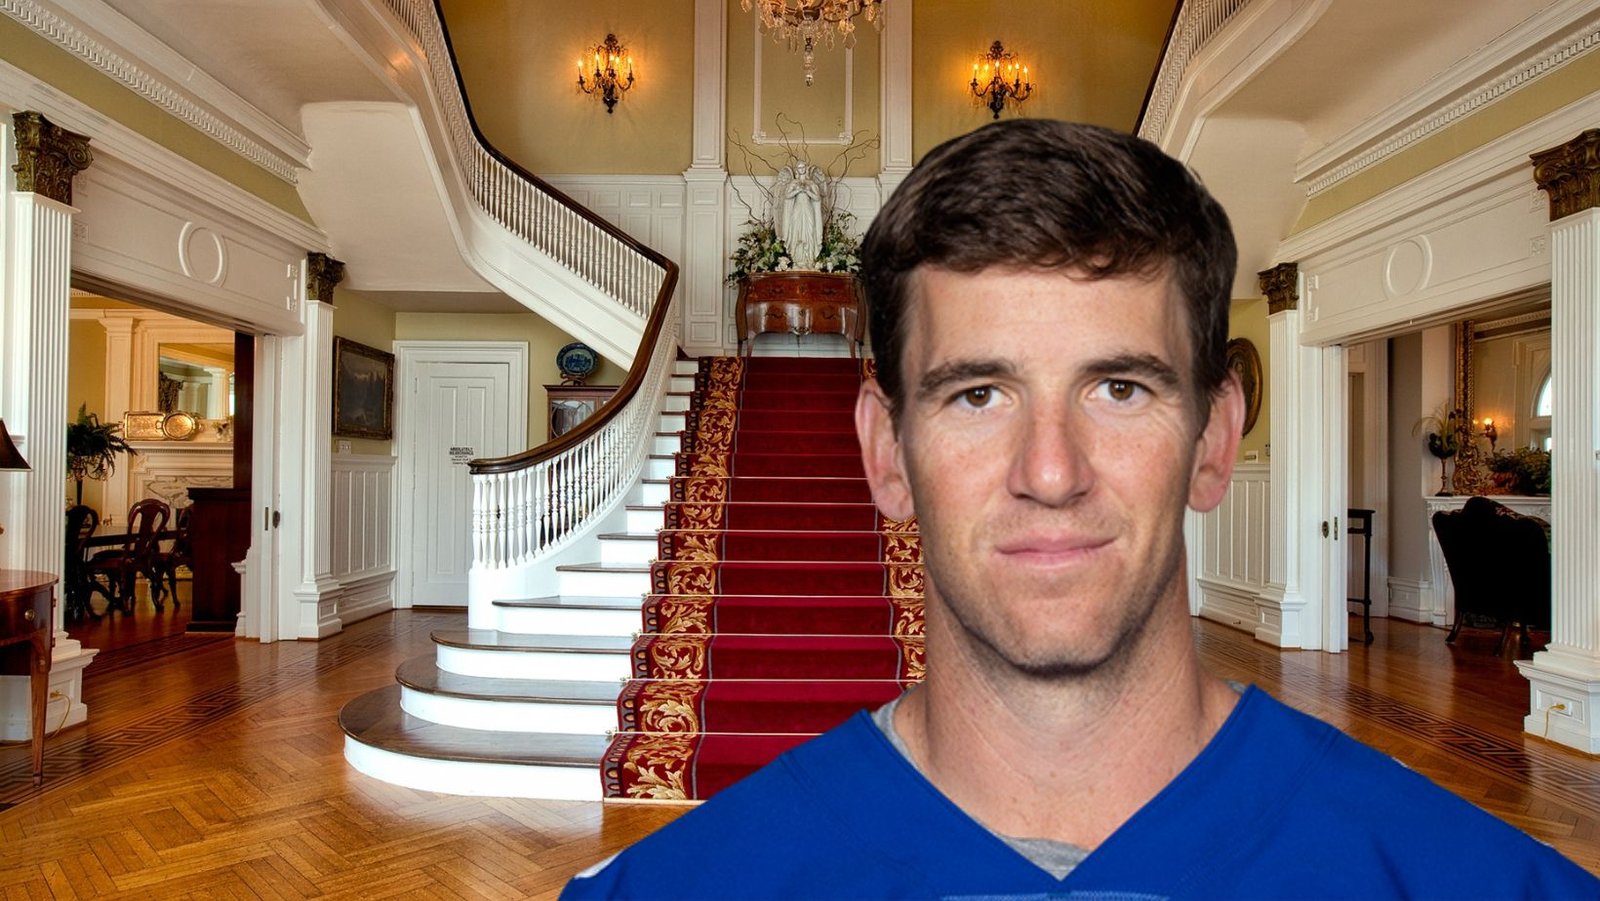 Where Does Eli Manning Live? A Glimpse into the Homes of a Football Legend